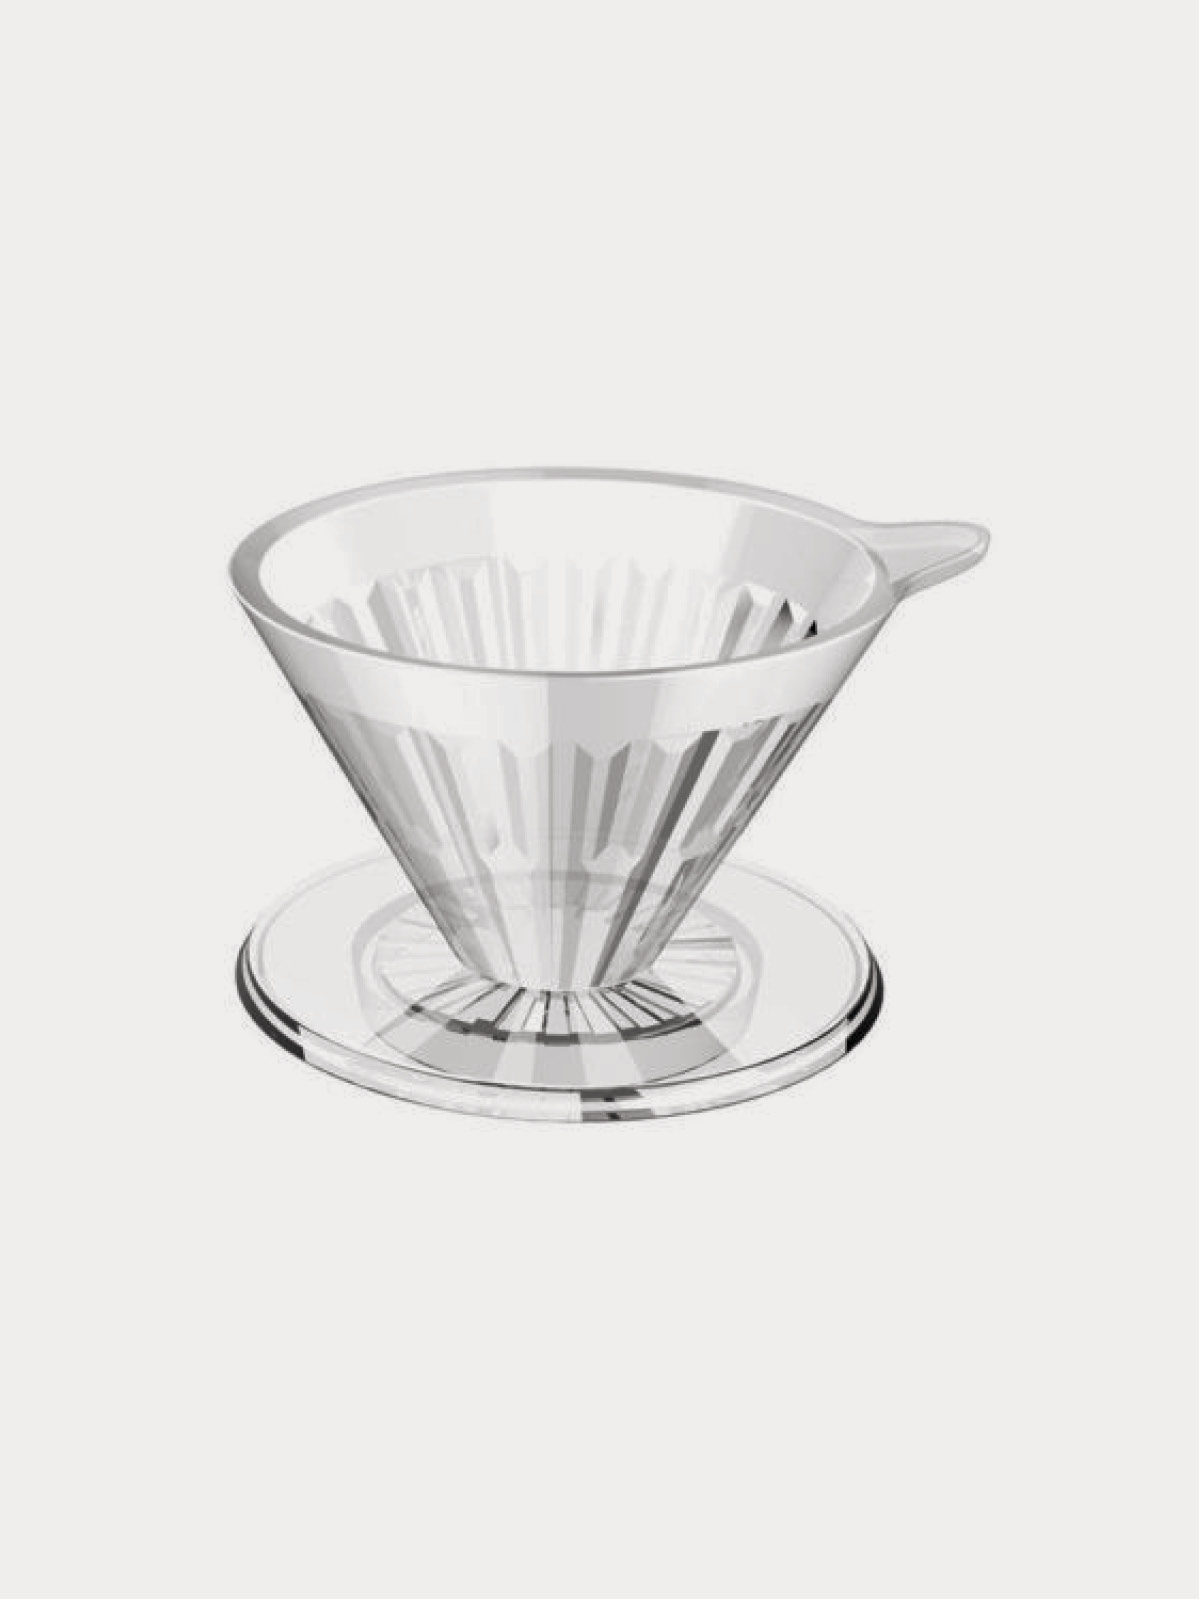 Timemore Crystal Eye Dripper - PCTG 02